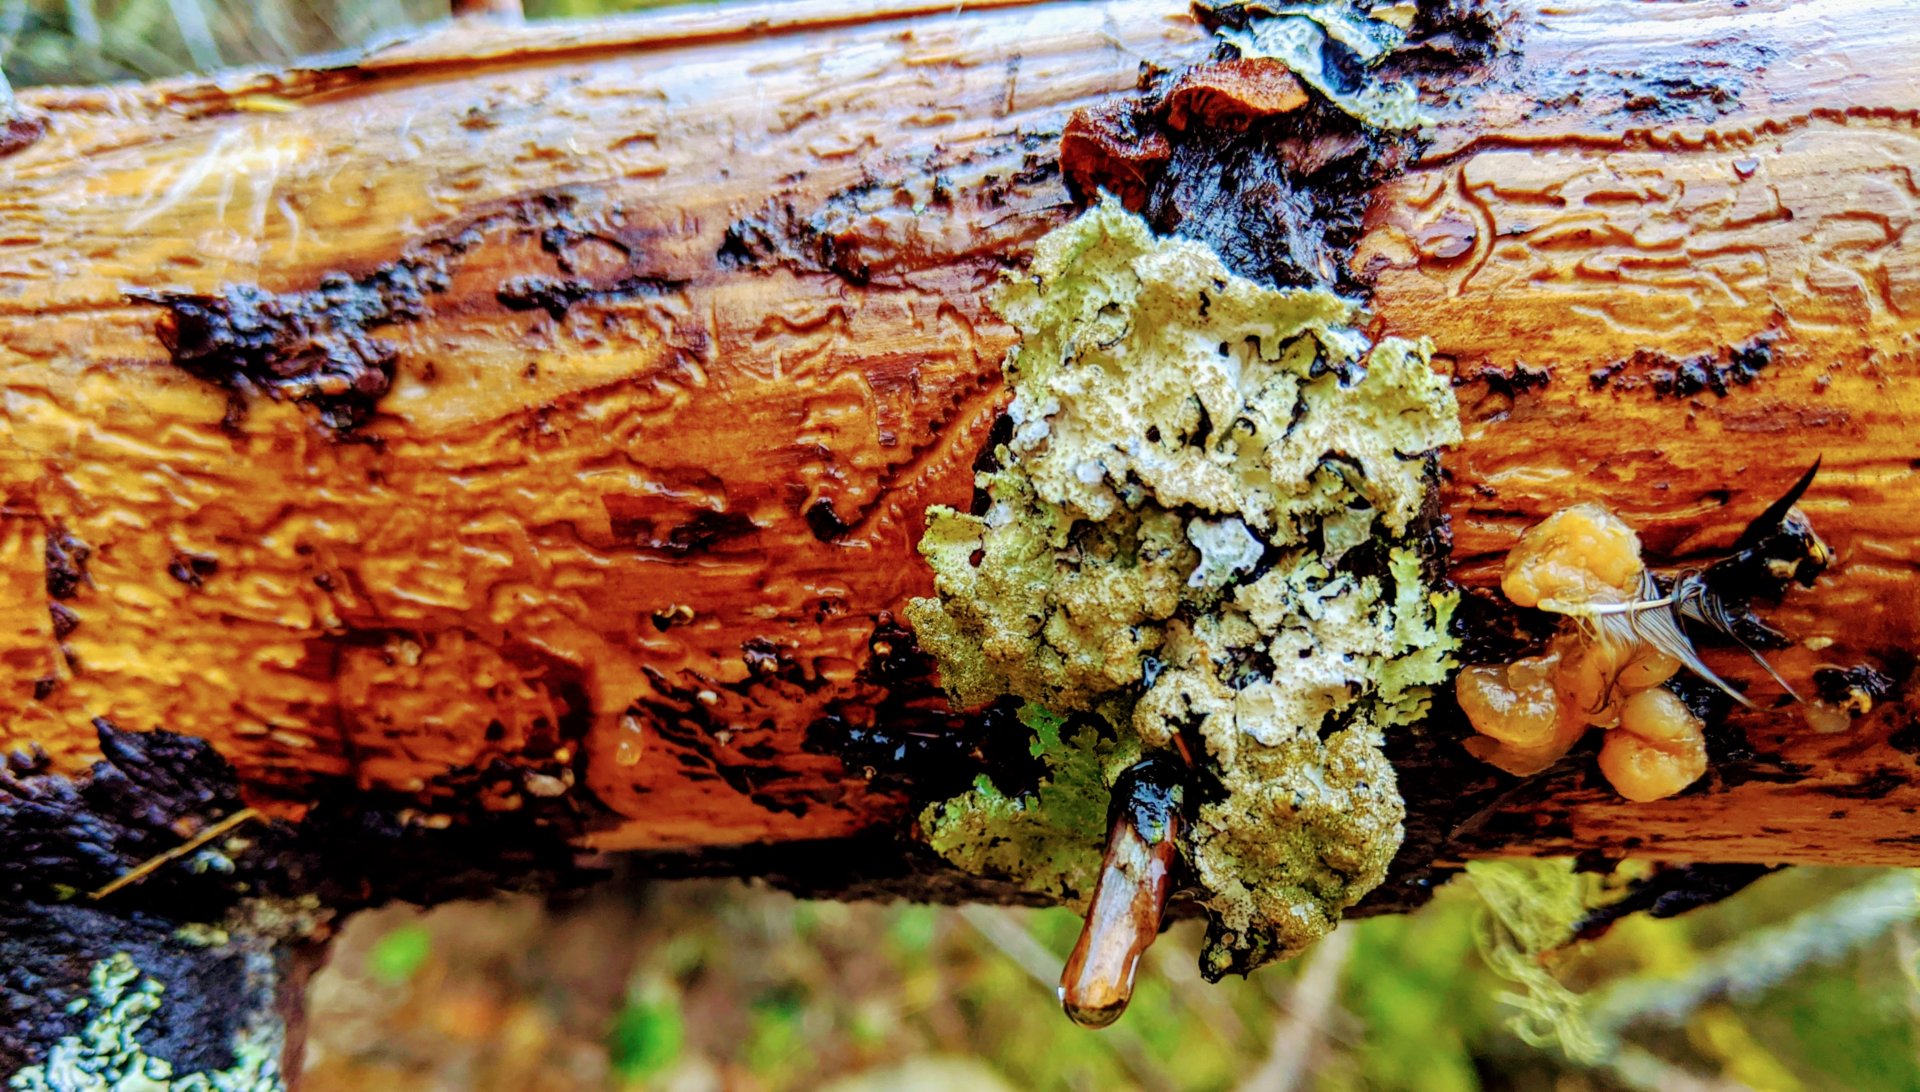 A wet log with some mushrooms in Downeast, Maine. 2019